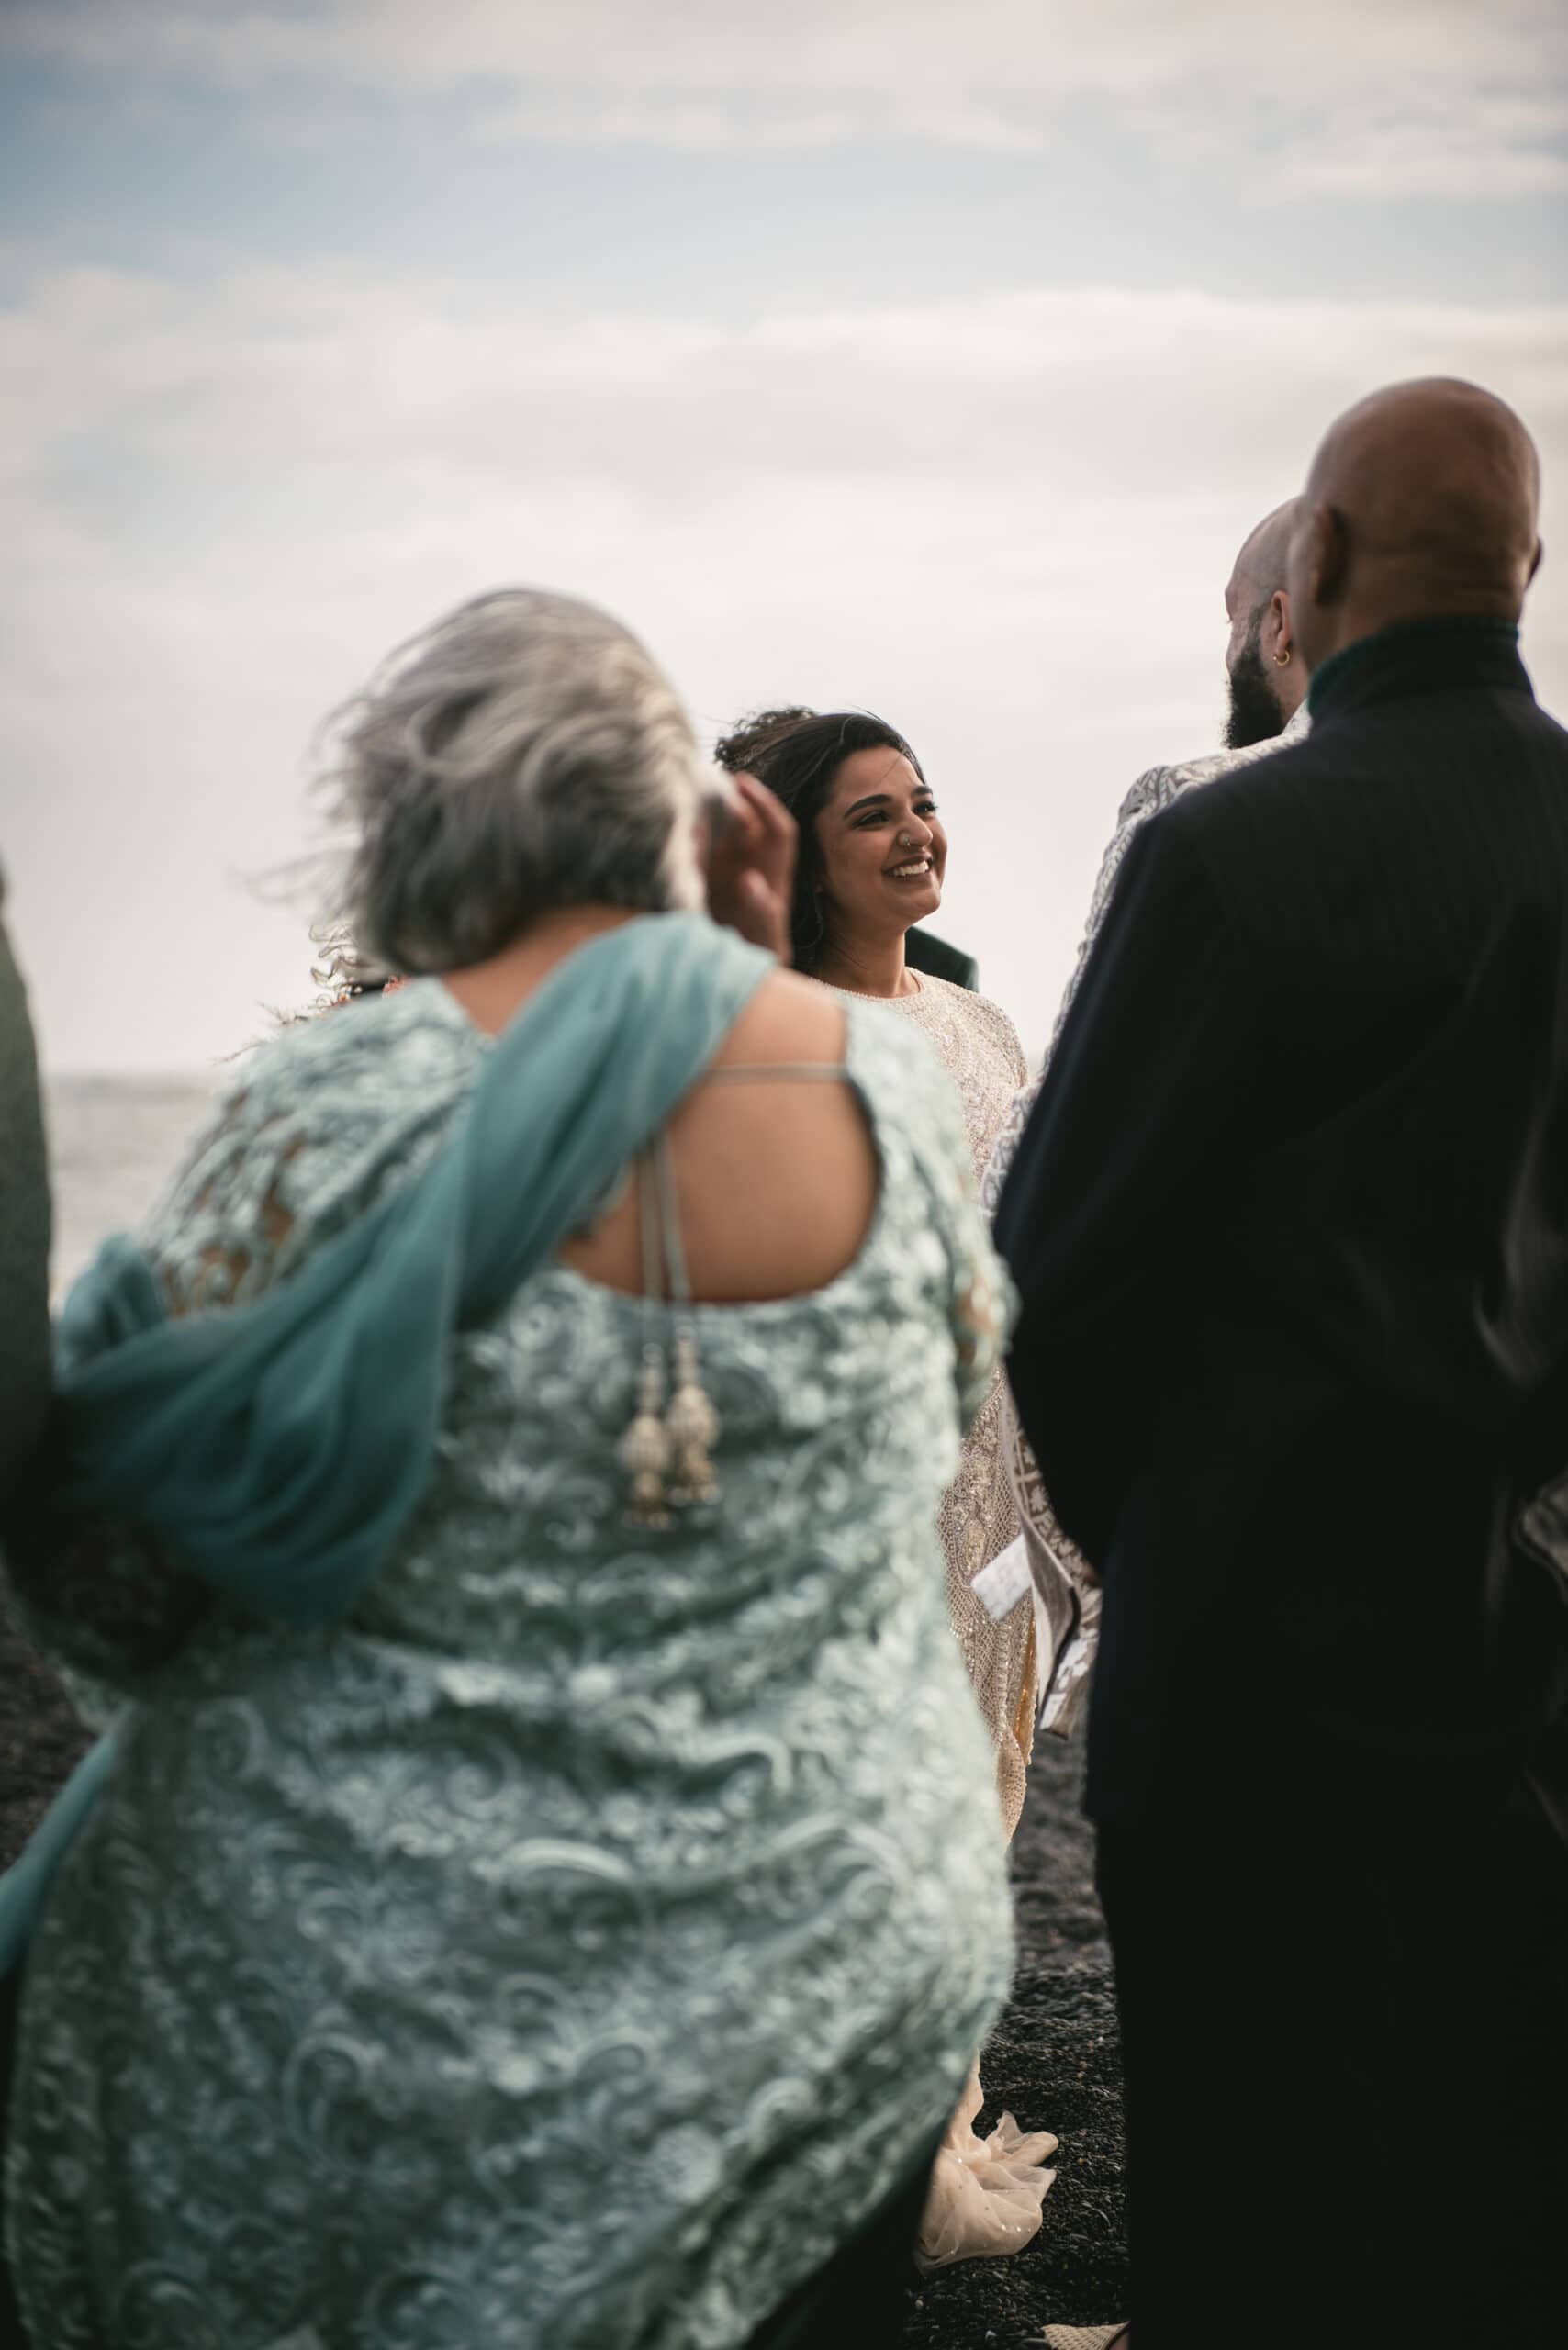 An Icelandic elopement filled with joy